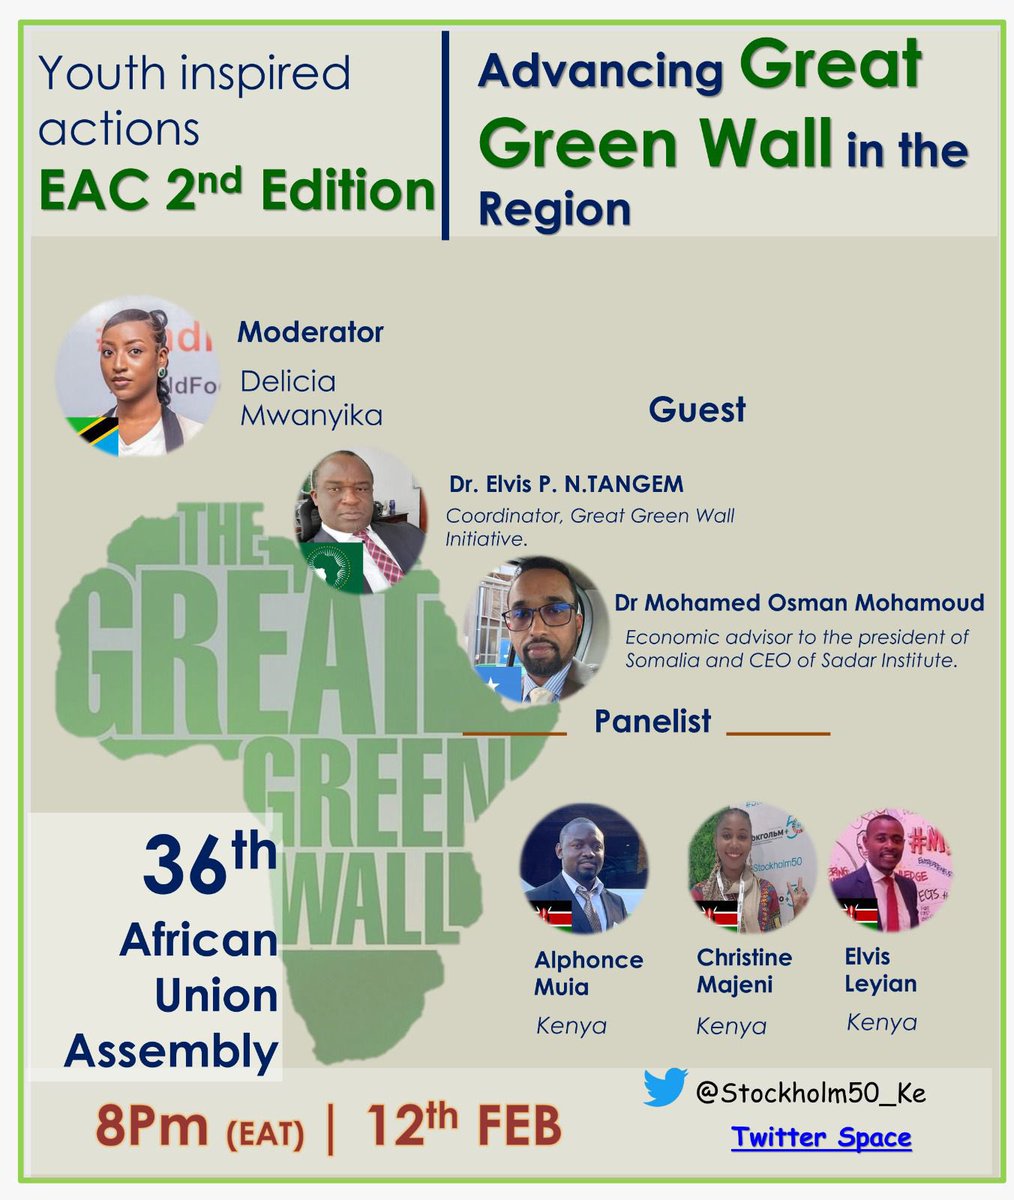 Honored to have Tanzania as a co-host through the EAC 2nd Edition Region Space. Africa Great Green Wall @AU_GGWSSI as well as @Stockholm50_Ke with the honorable experts at the @AfricanUnion level. @igadsecretariat @Environment_Ke @Eng_F_Ngeno @MohamedOsmanSom